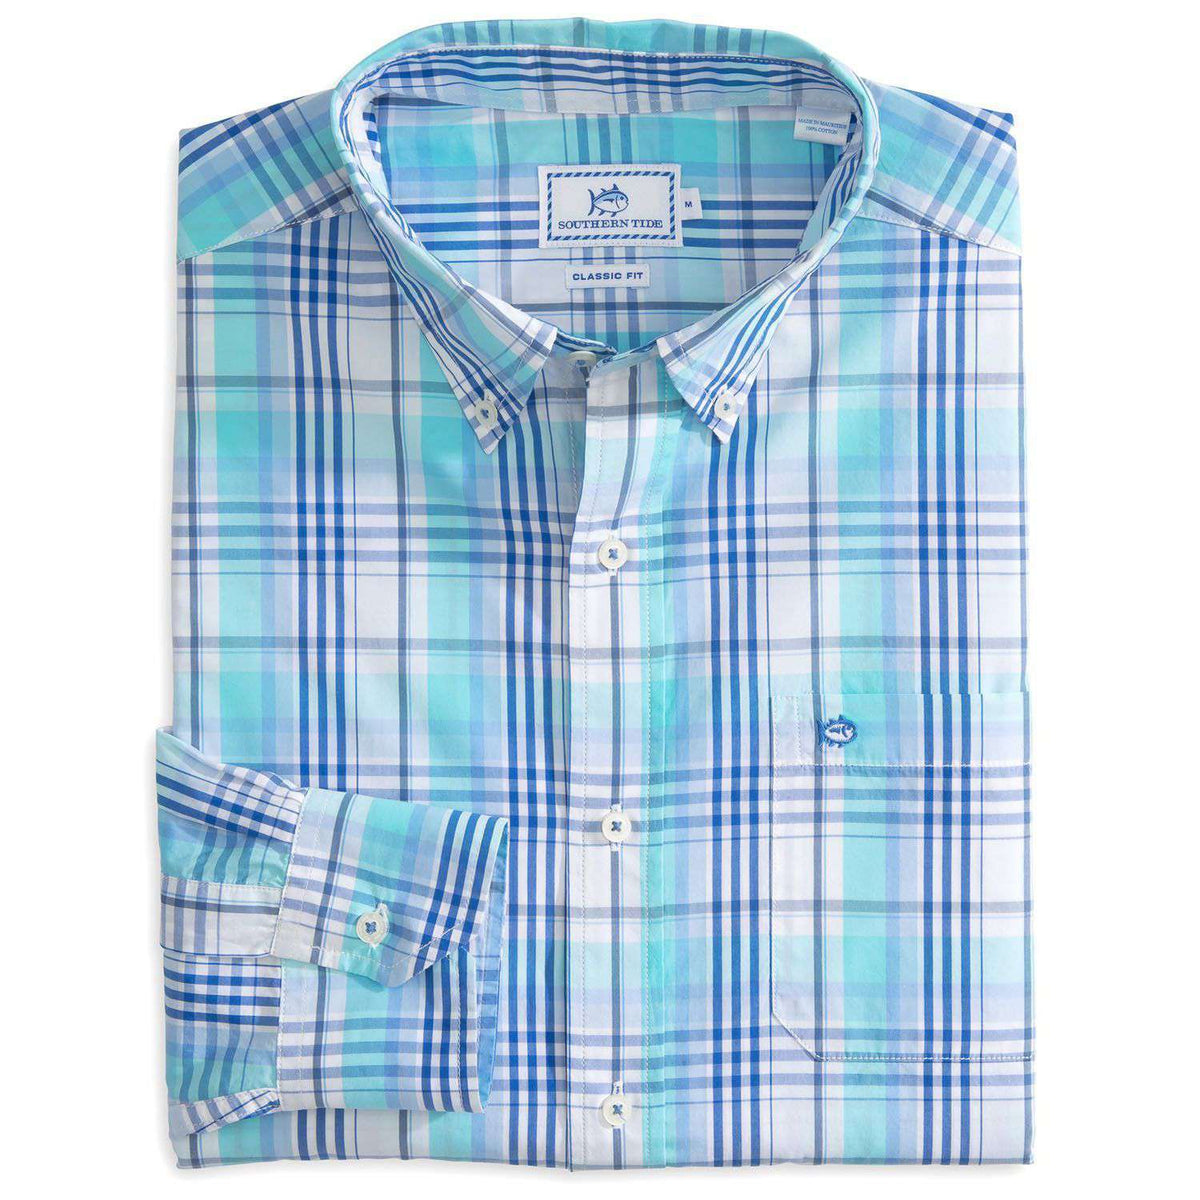 Atlantic Plaid Sport Shirt in Royal Blue by Southern Tide - Country Club Prep